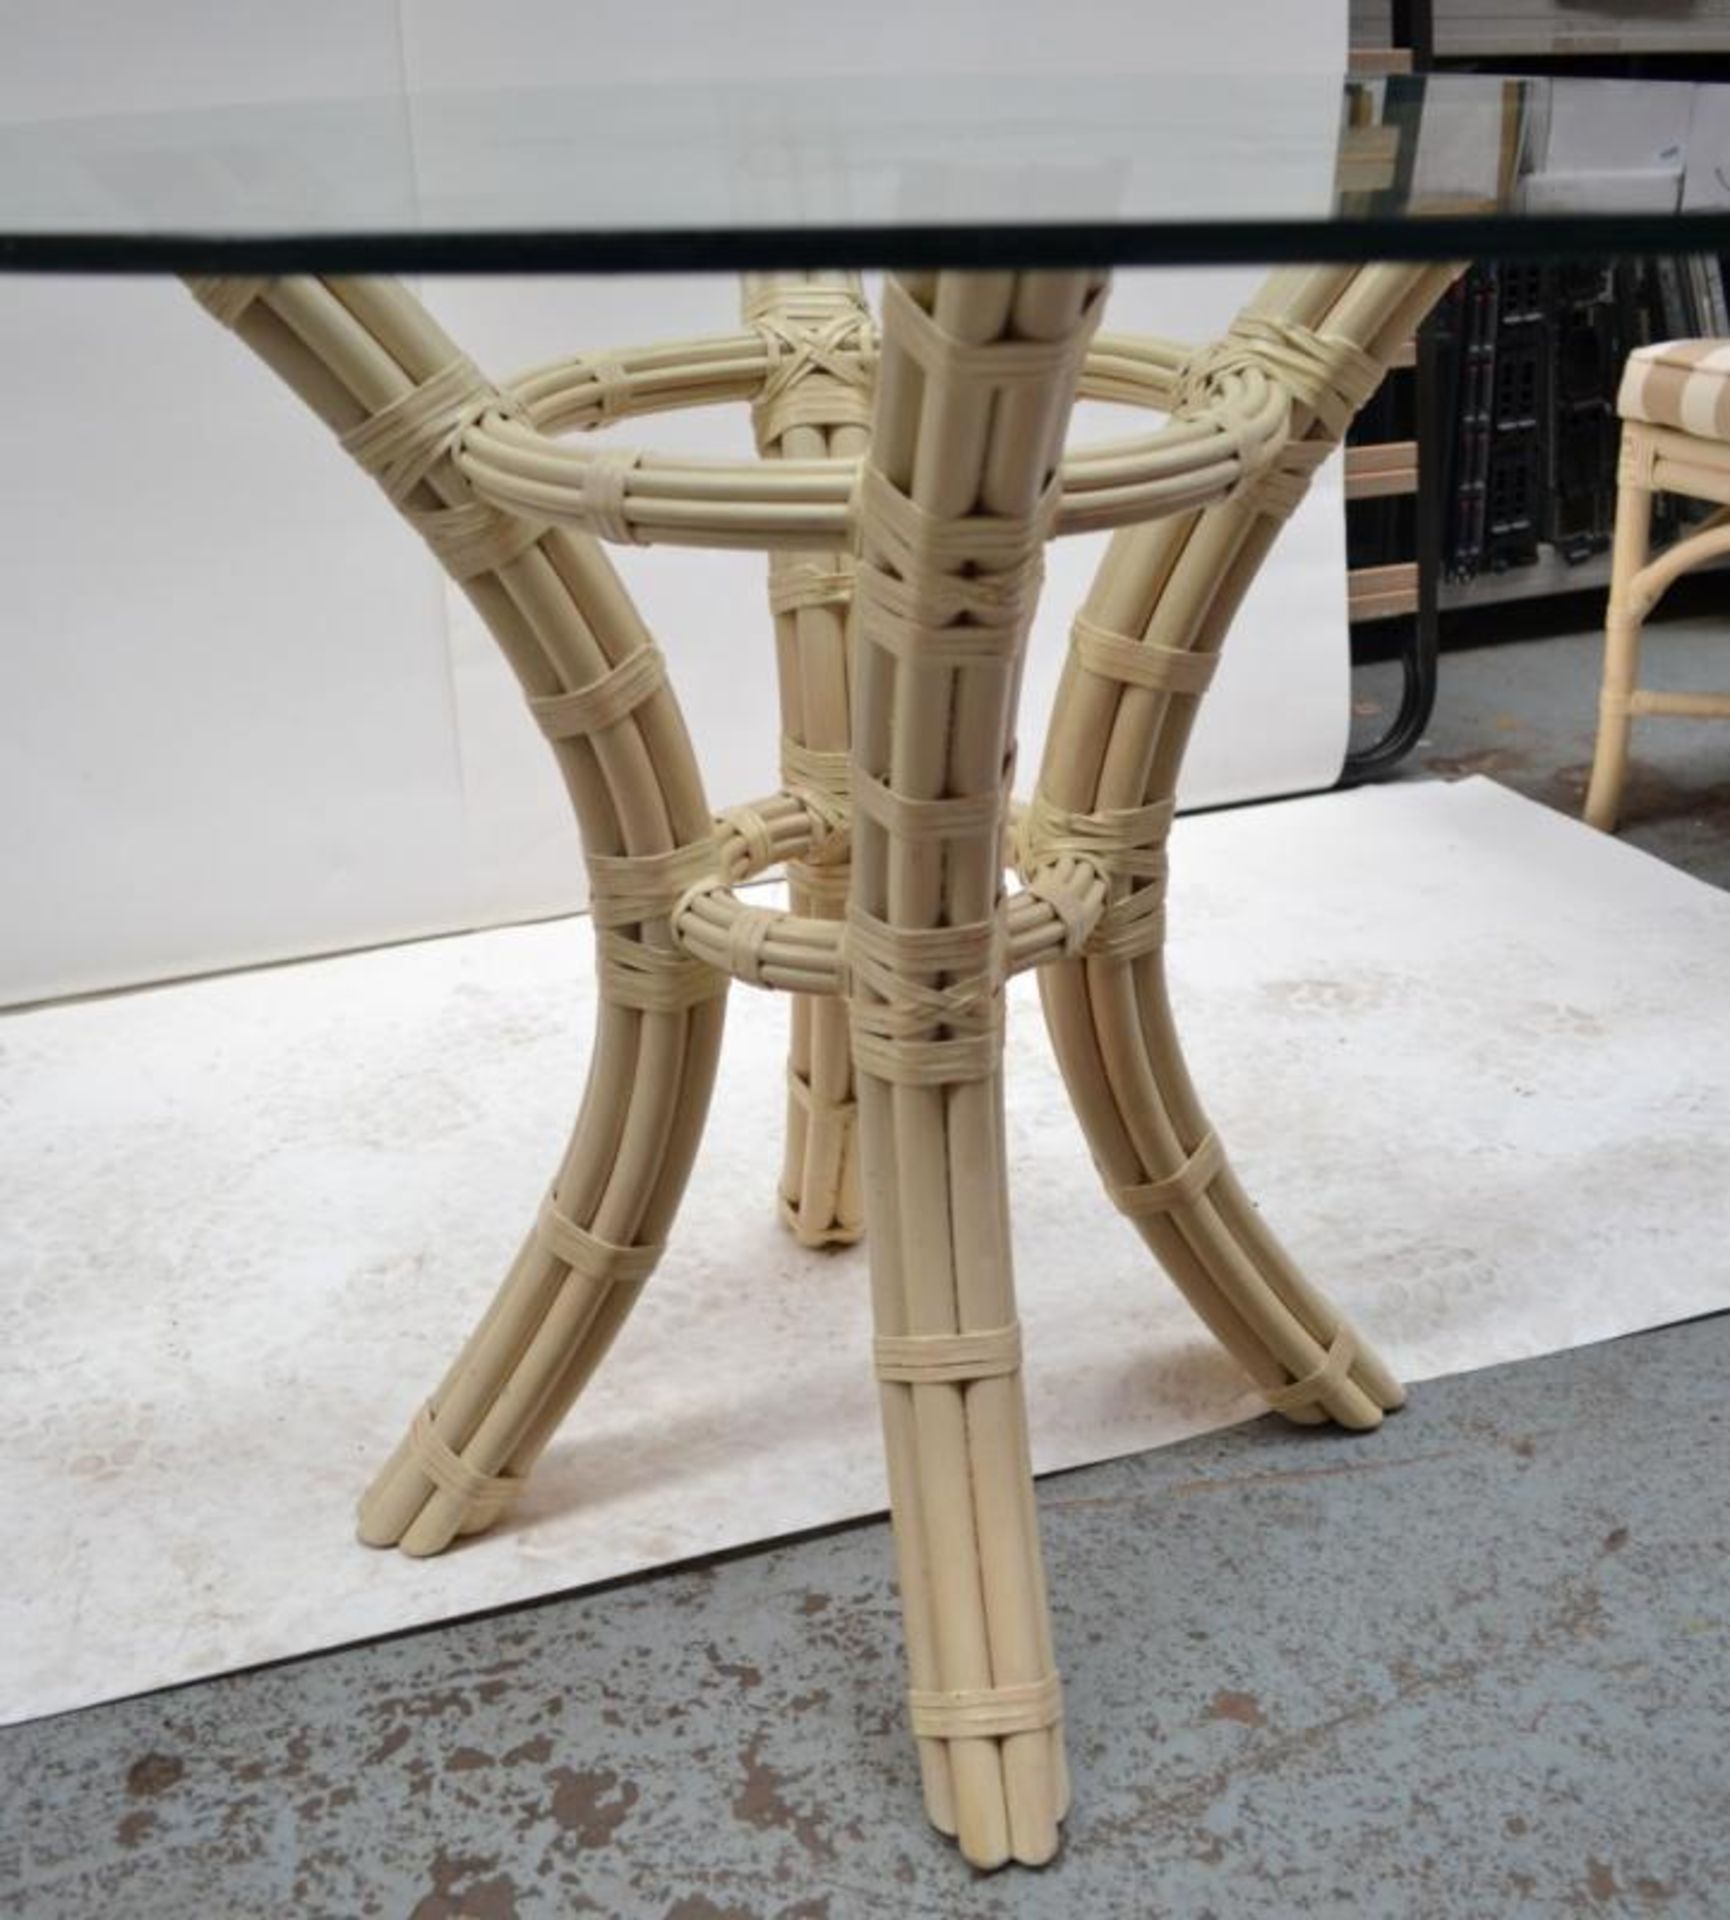 Glass Topped Cane Table with 4 Chairs - Pre-owned In Good Condition - AE010 - CL007 - Location: - Image 8 of 13